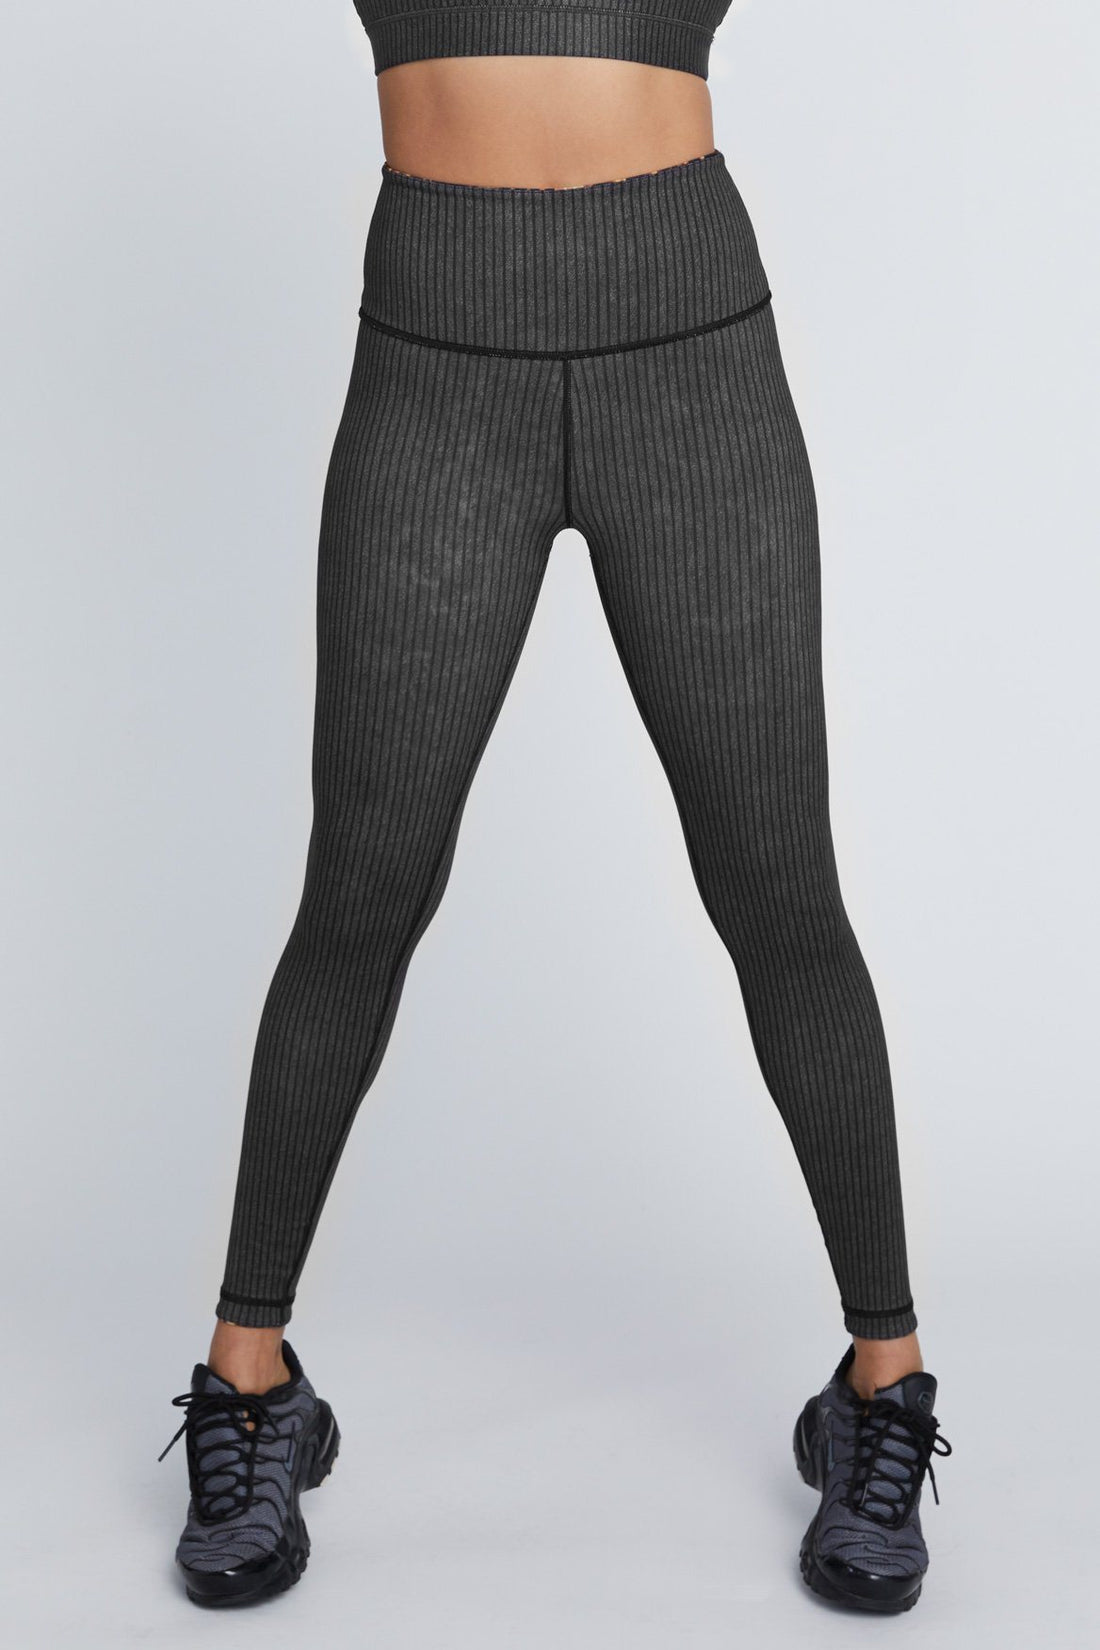 Buy The Dance Bible Grey Military Print Sports Leggings With Pockets Online